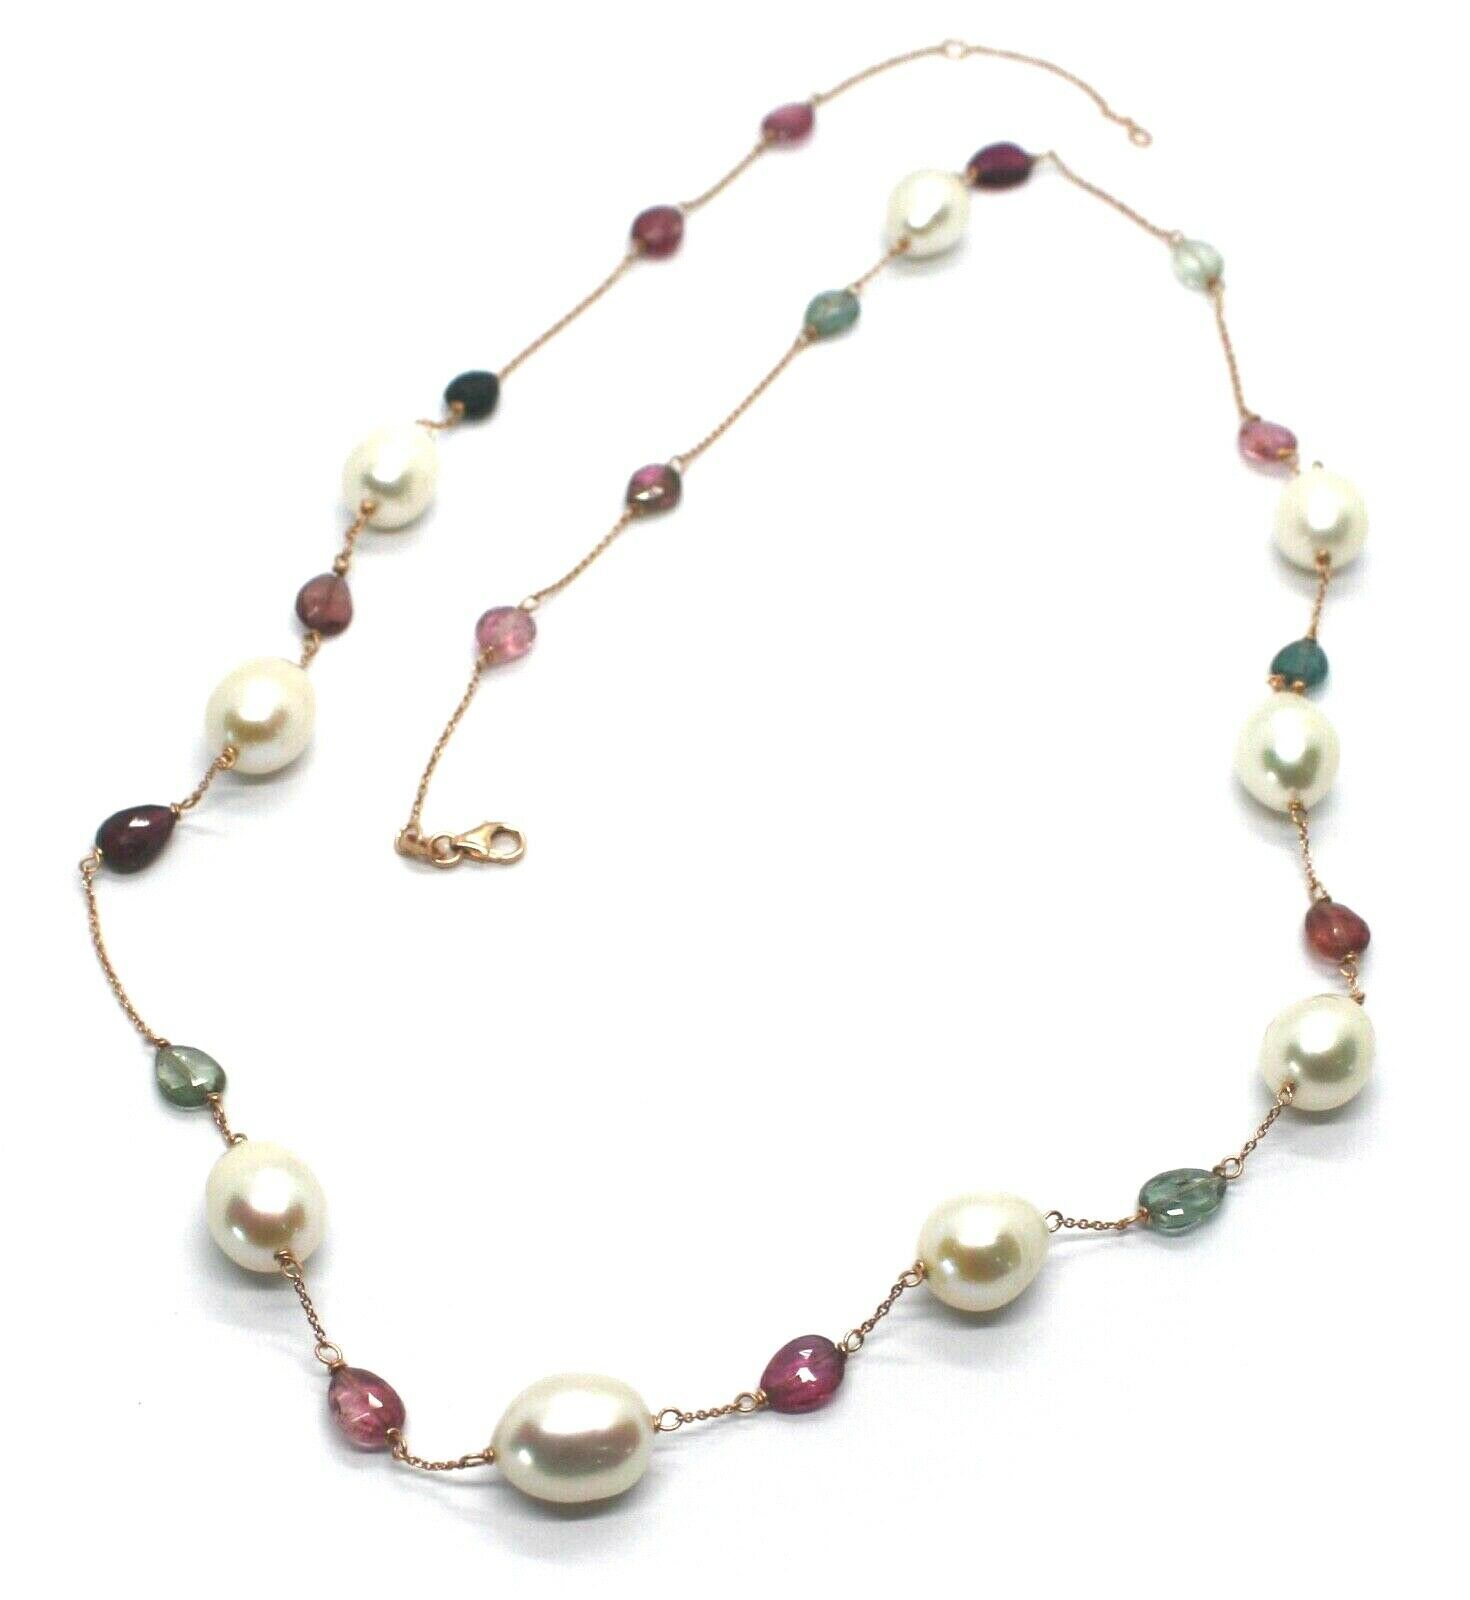 Primary image for 18K ROSE GOLD LONG NECKLACE ROLO CHAIN, BIG 12mm PEARLS & TOURMALINE DROPS 26.7"